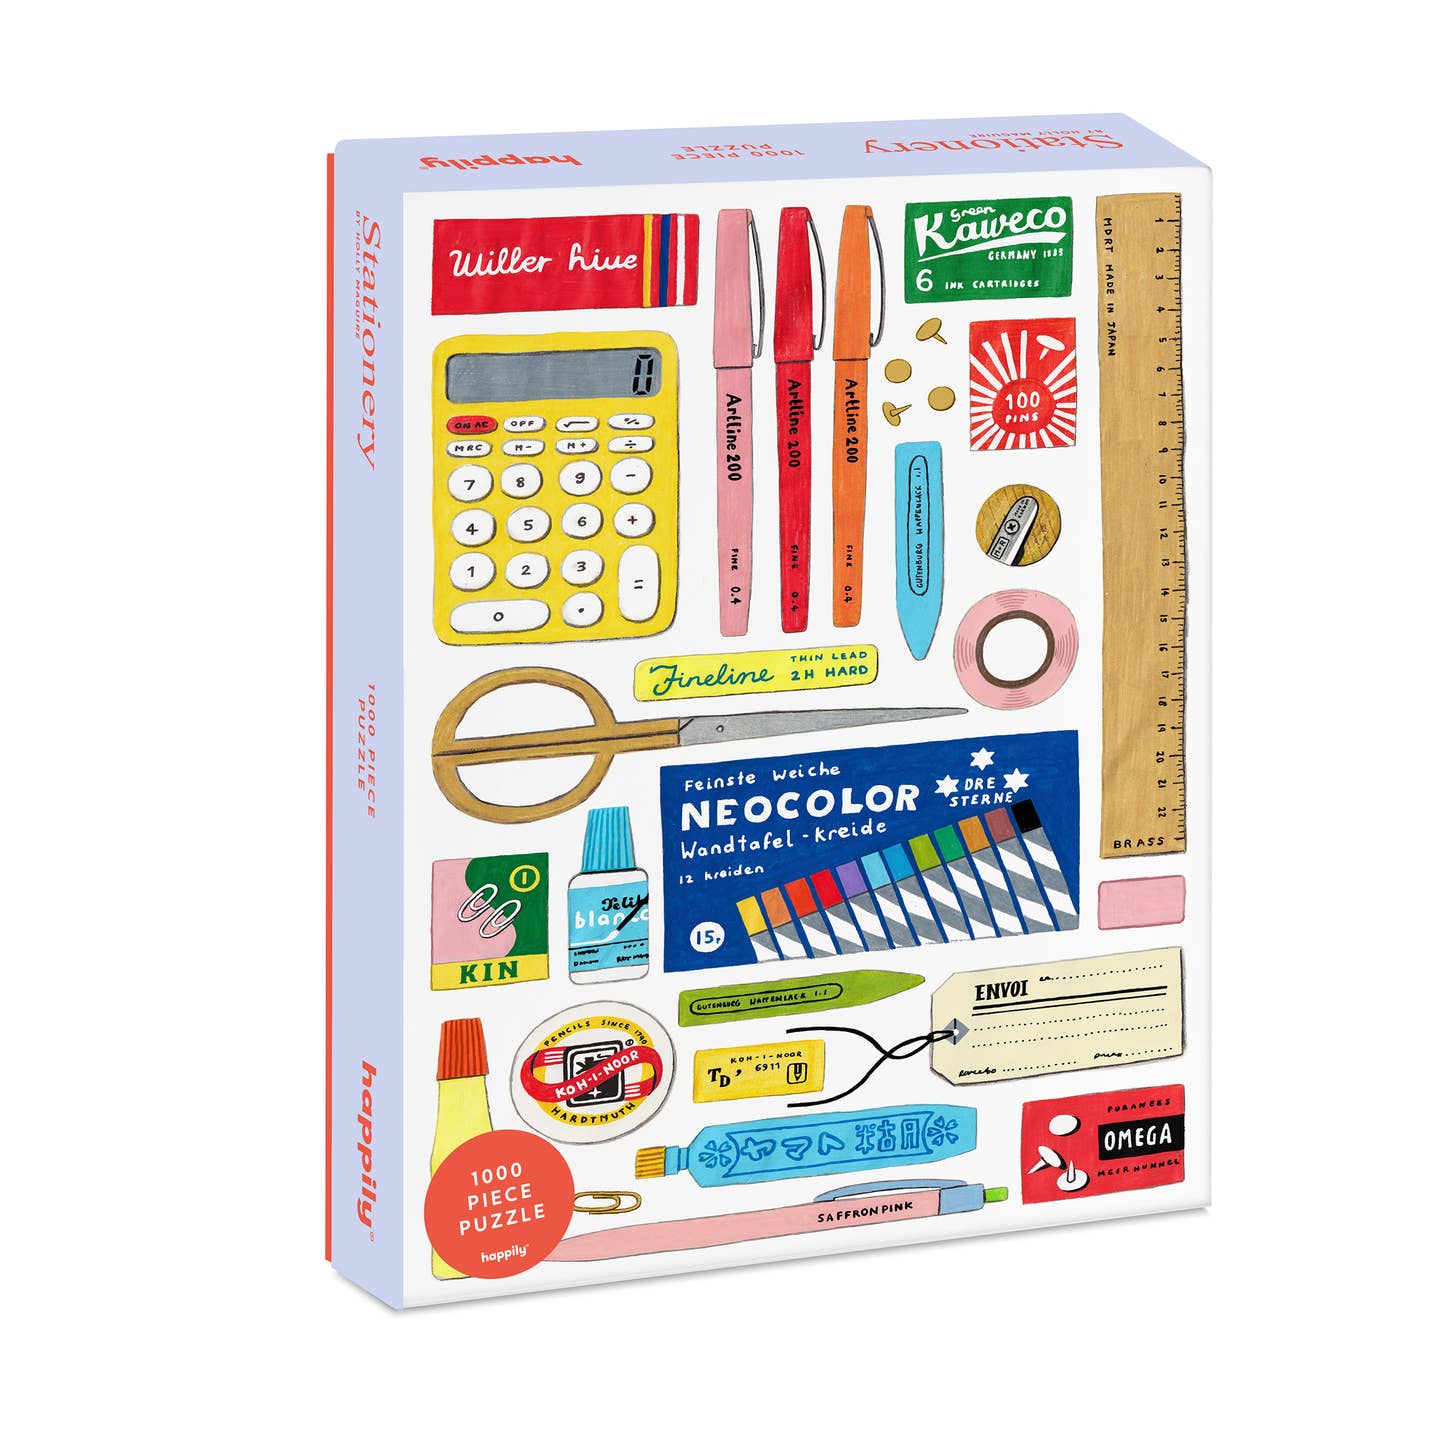 Happily Puzzles Stationery By Holly Maguire - 1,000 Piece Premium Puzzle